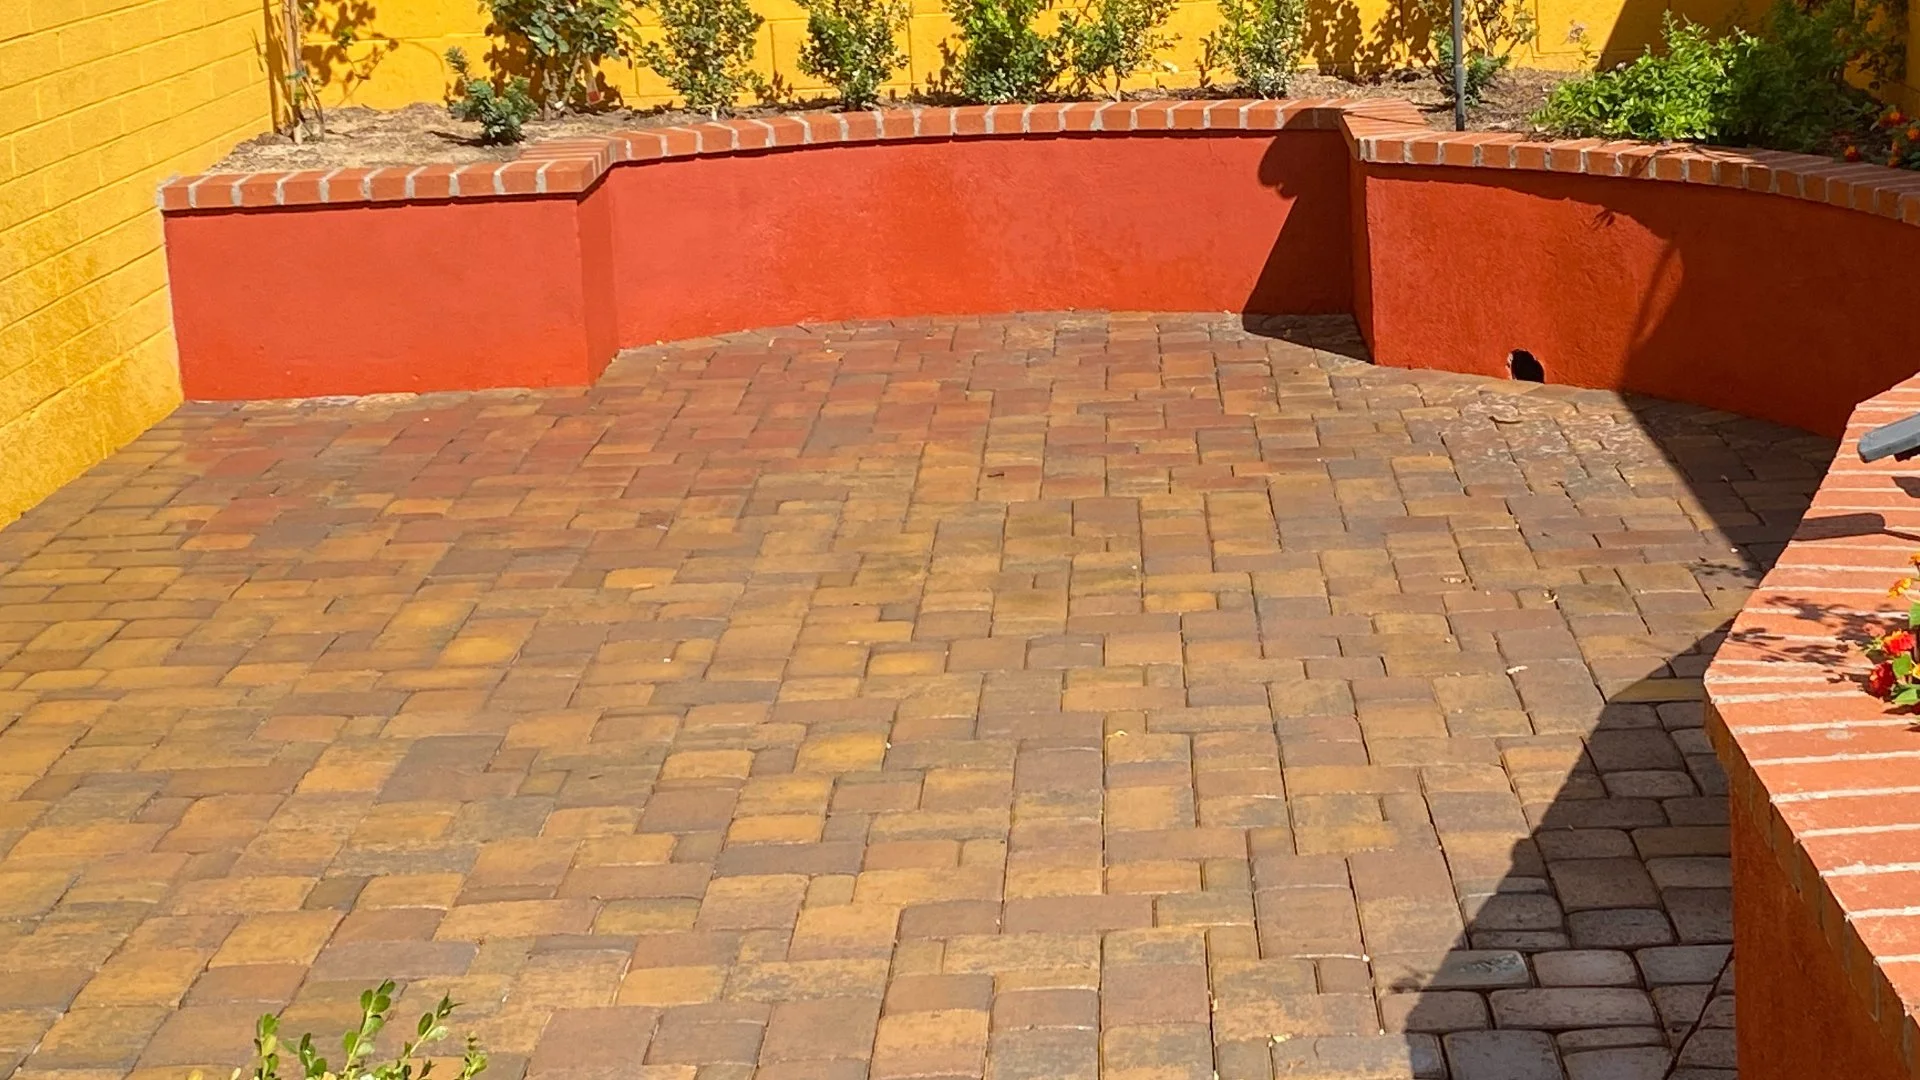 Pavers - The Key to a Durable, Long-Lasting Patio